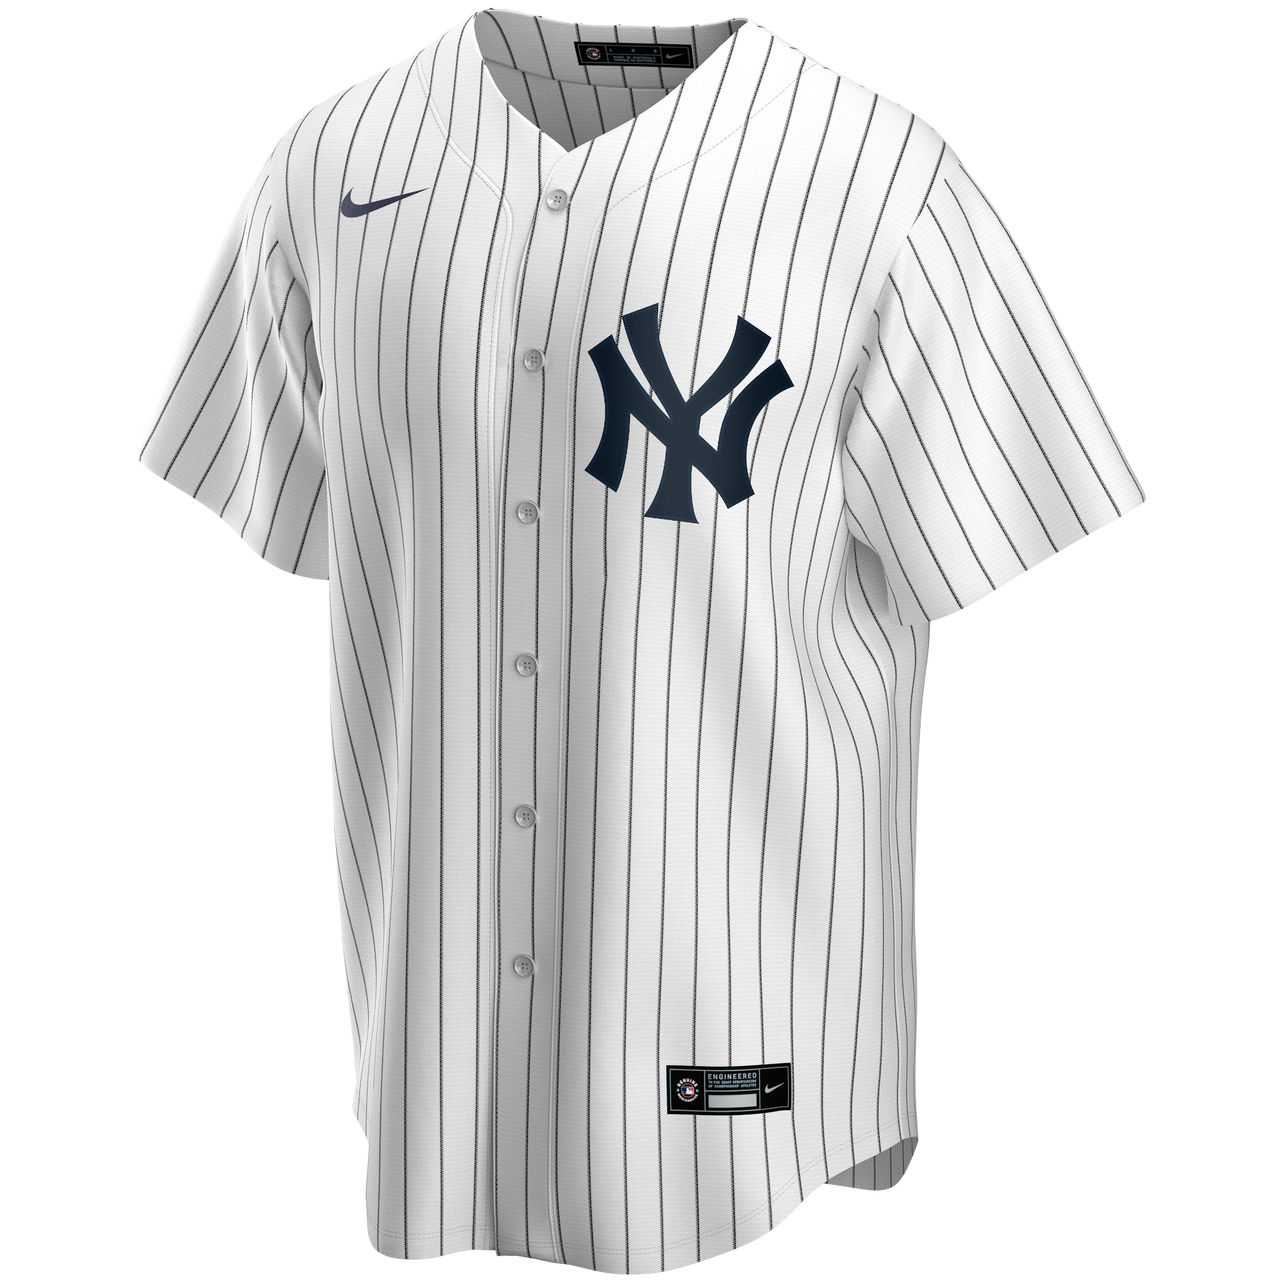 Babe Ruth New York Yankees Cooperstown Collection 3/4 T-Shirt